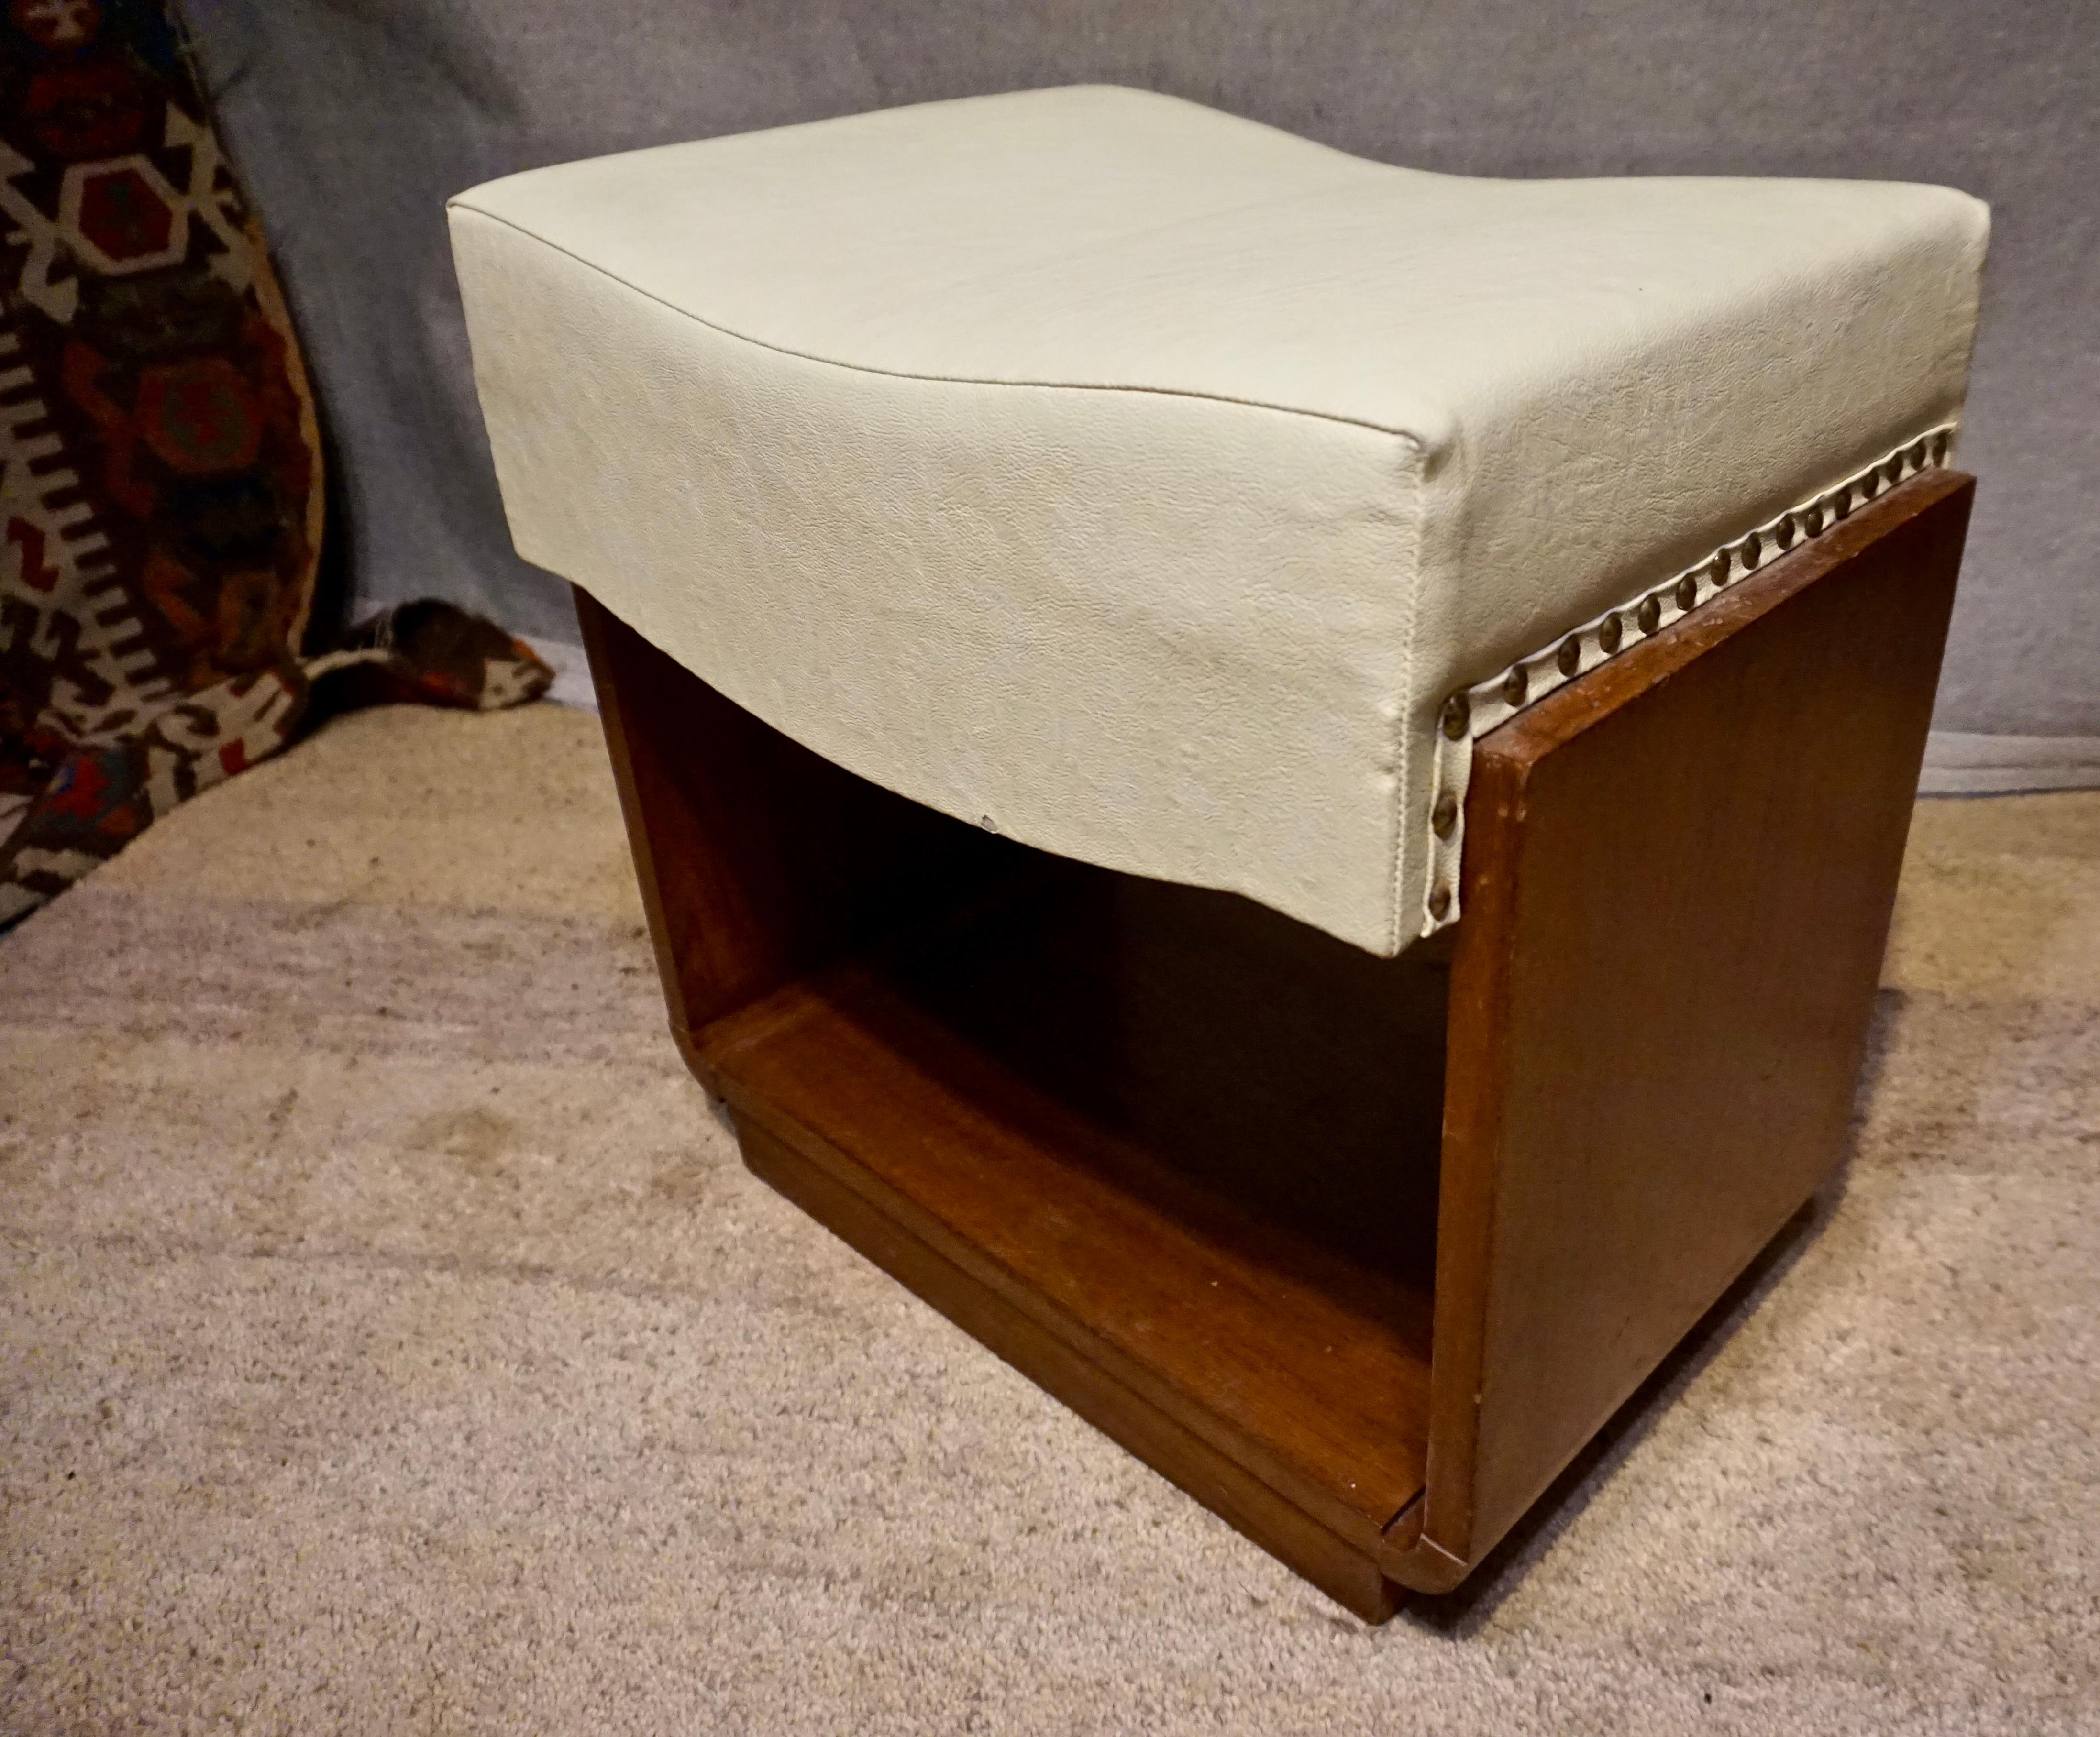 Clean lines and solid wood midcentury stool in good condition with leatherette upholstery,

circa 1950s.